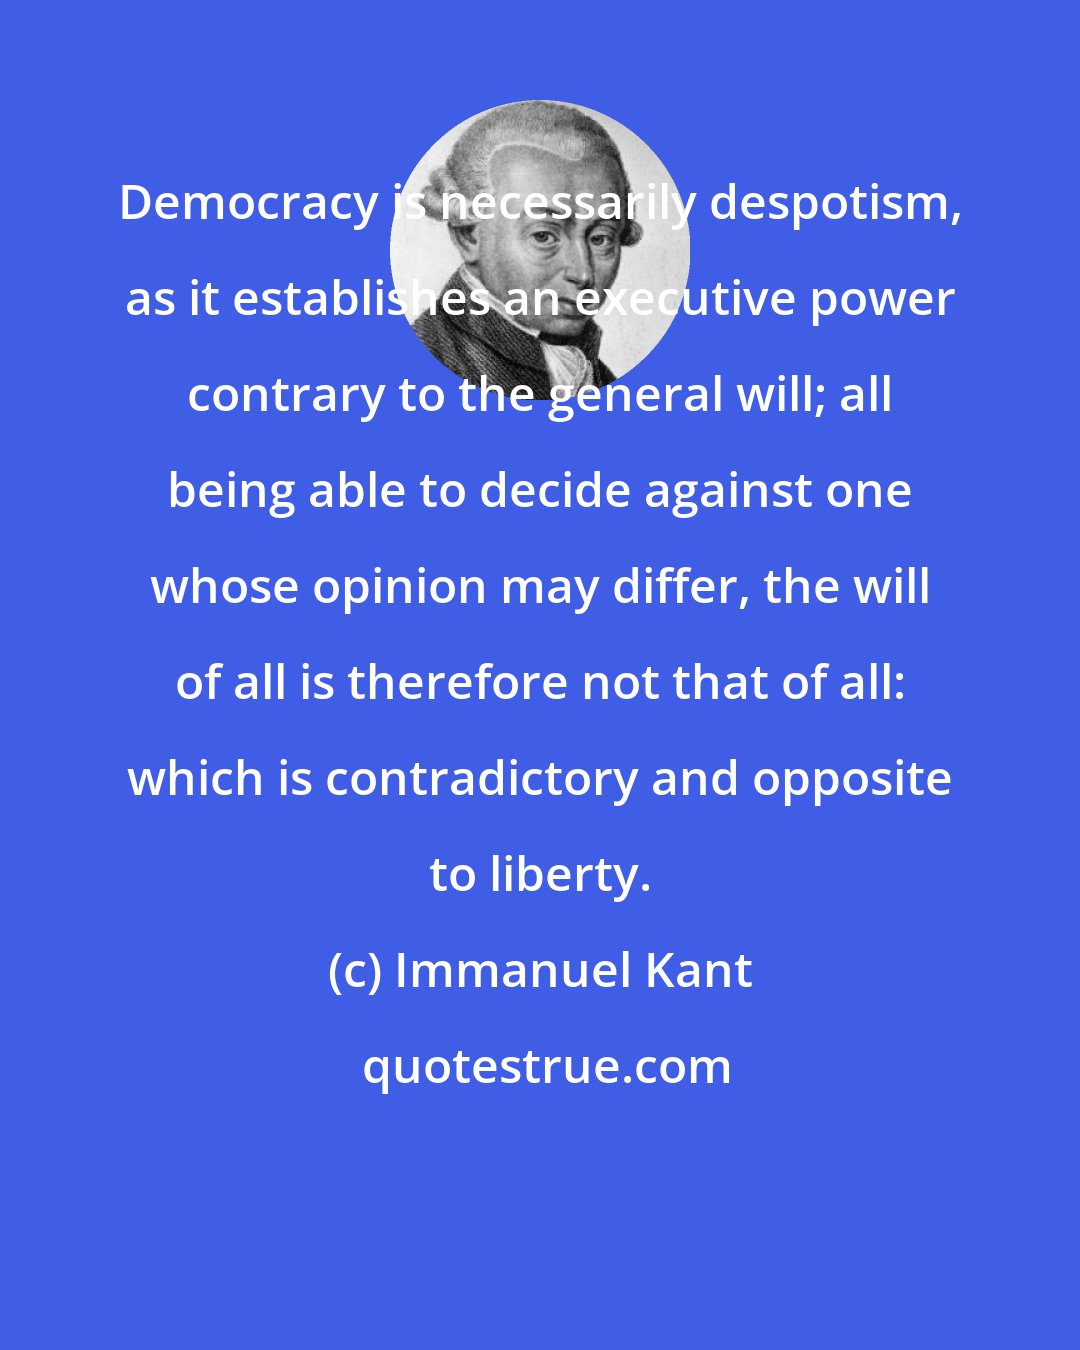 Immanuel Kant: Democracy is necessarily despotism, as it establishes an executive power contrary to the general will; all being able to decide against one whose opinion may differ, the will of all is therefore not that of all: which is contradictory and opposite to liberty.